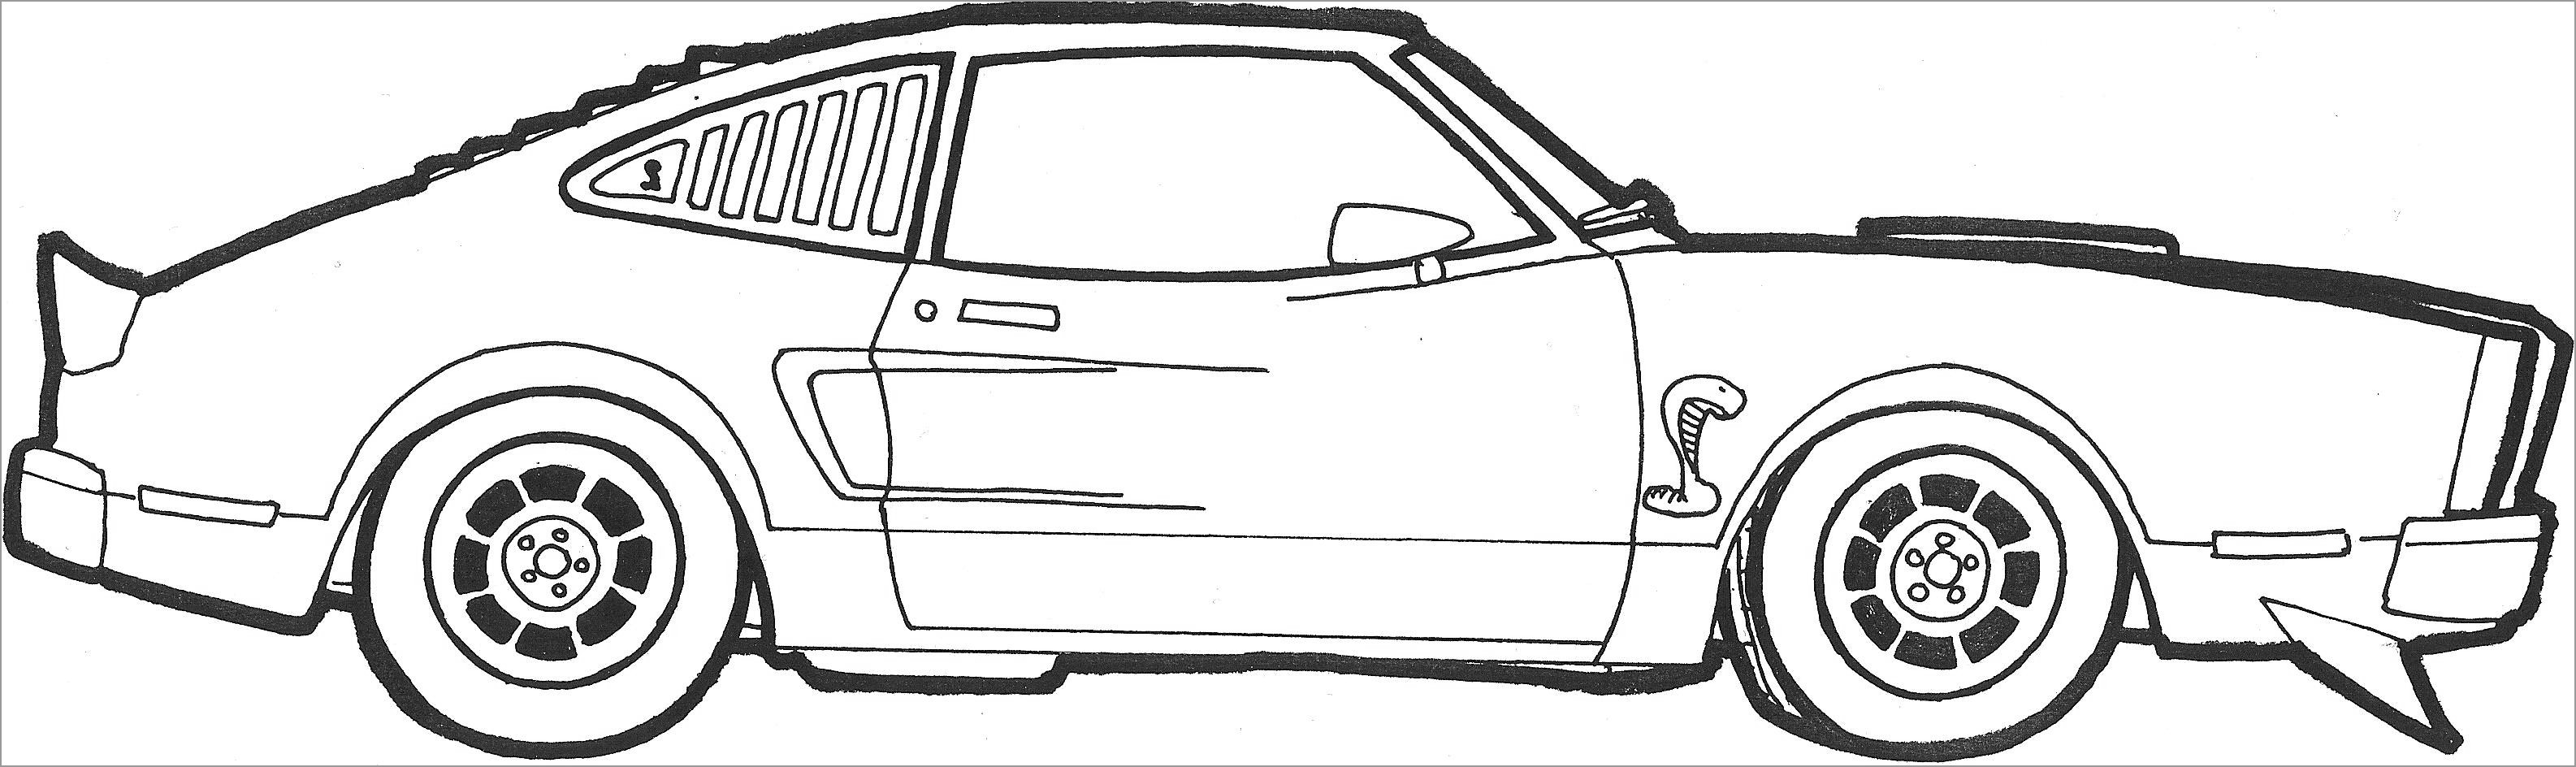 Classic Cars Coloring Pages to Print